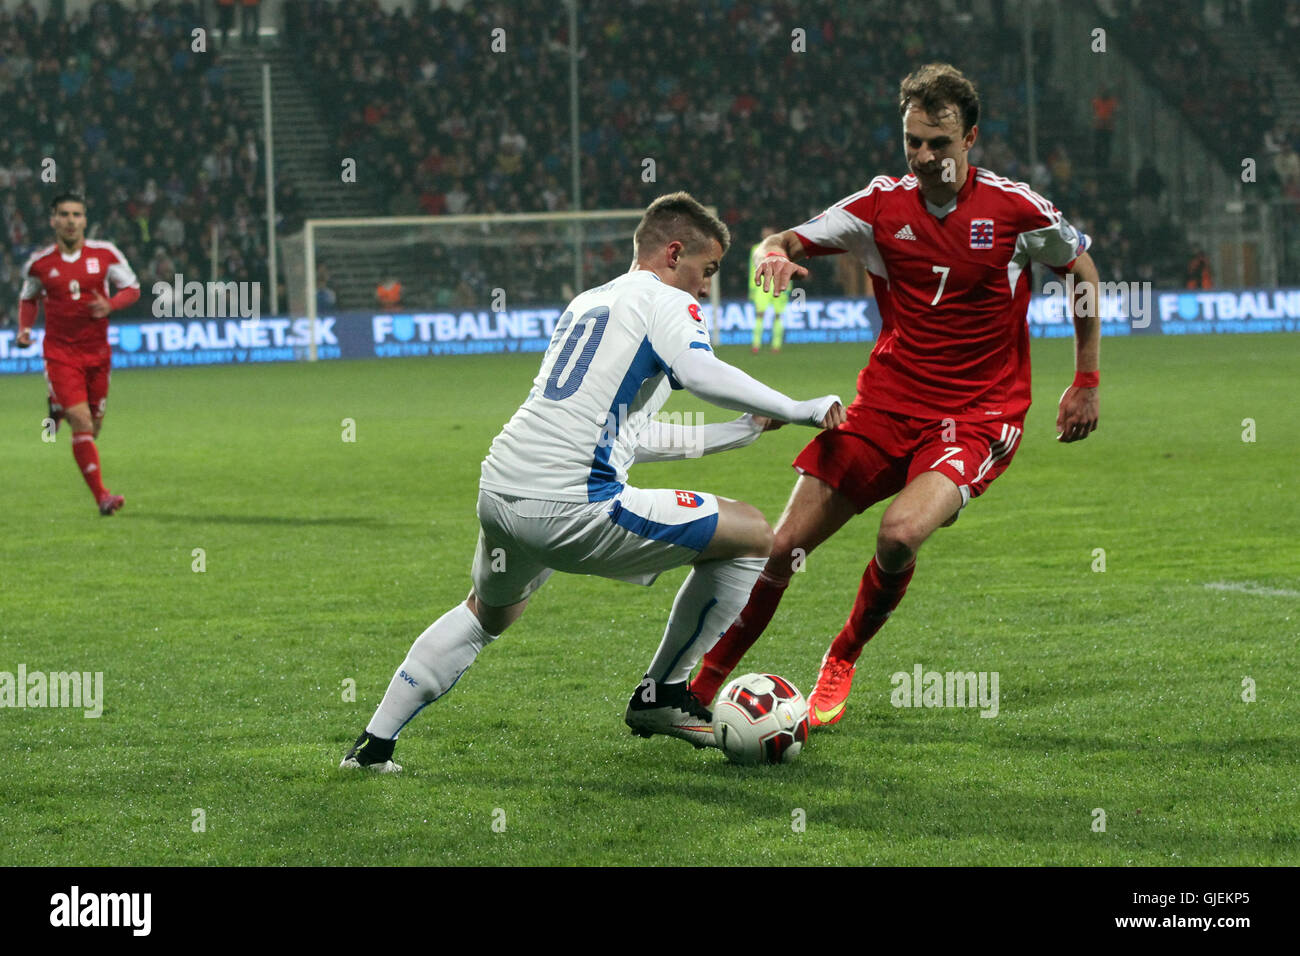 Robert Mak (left) and Lars Gerson (7) vie for the ball during the EURO 2016 qualifier Slovakia vs Luxembourg 3-0. Stock Photo